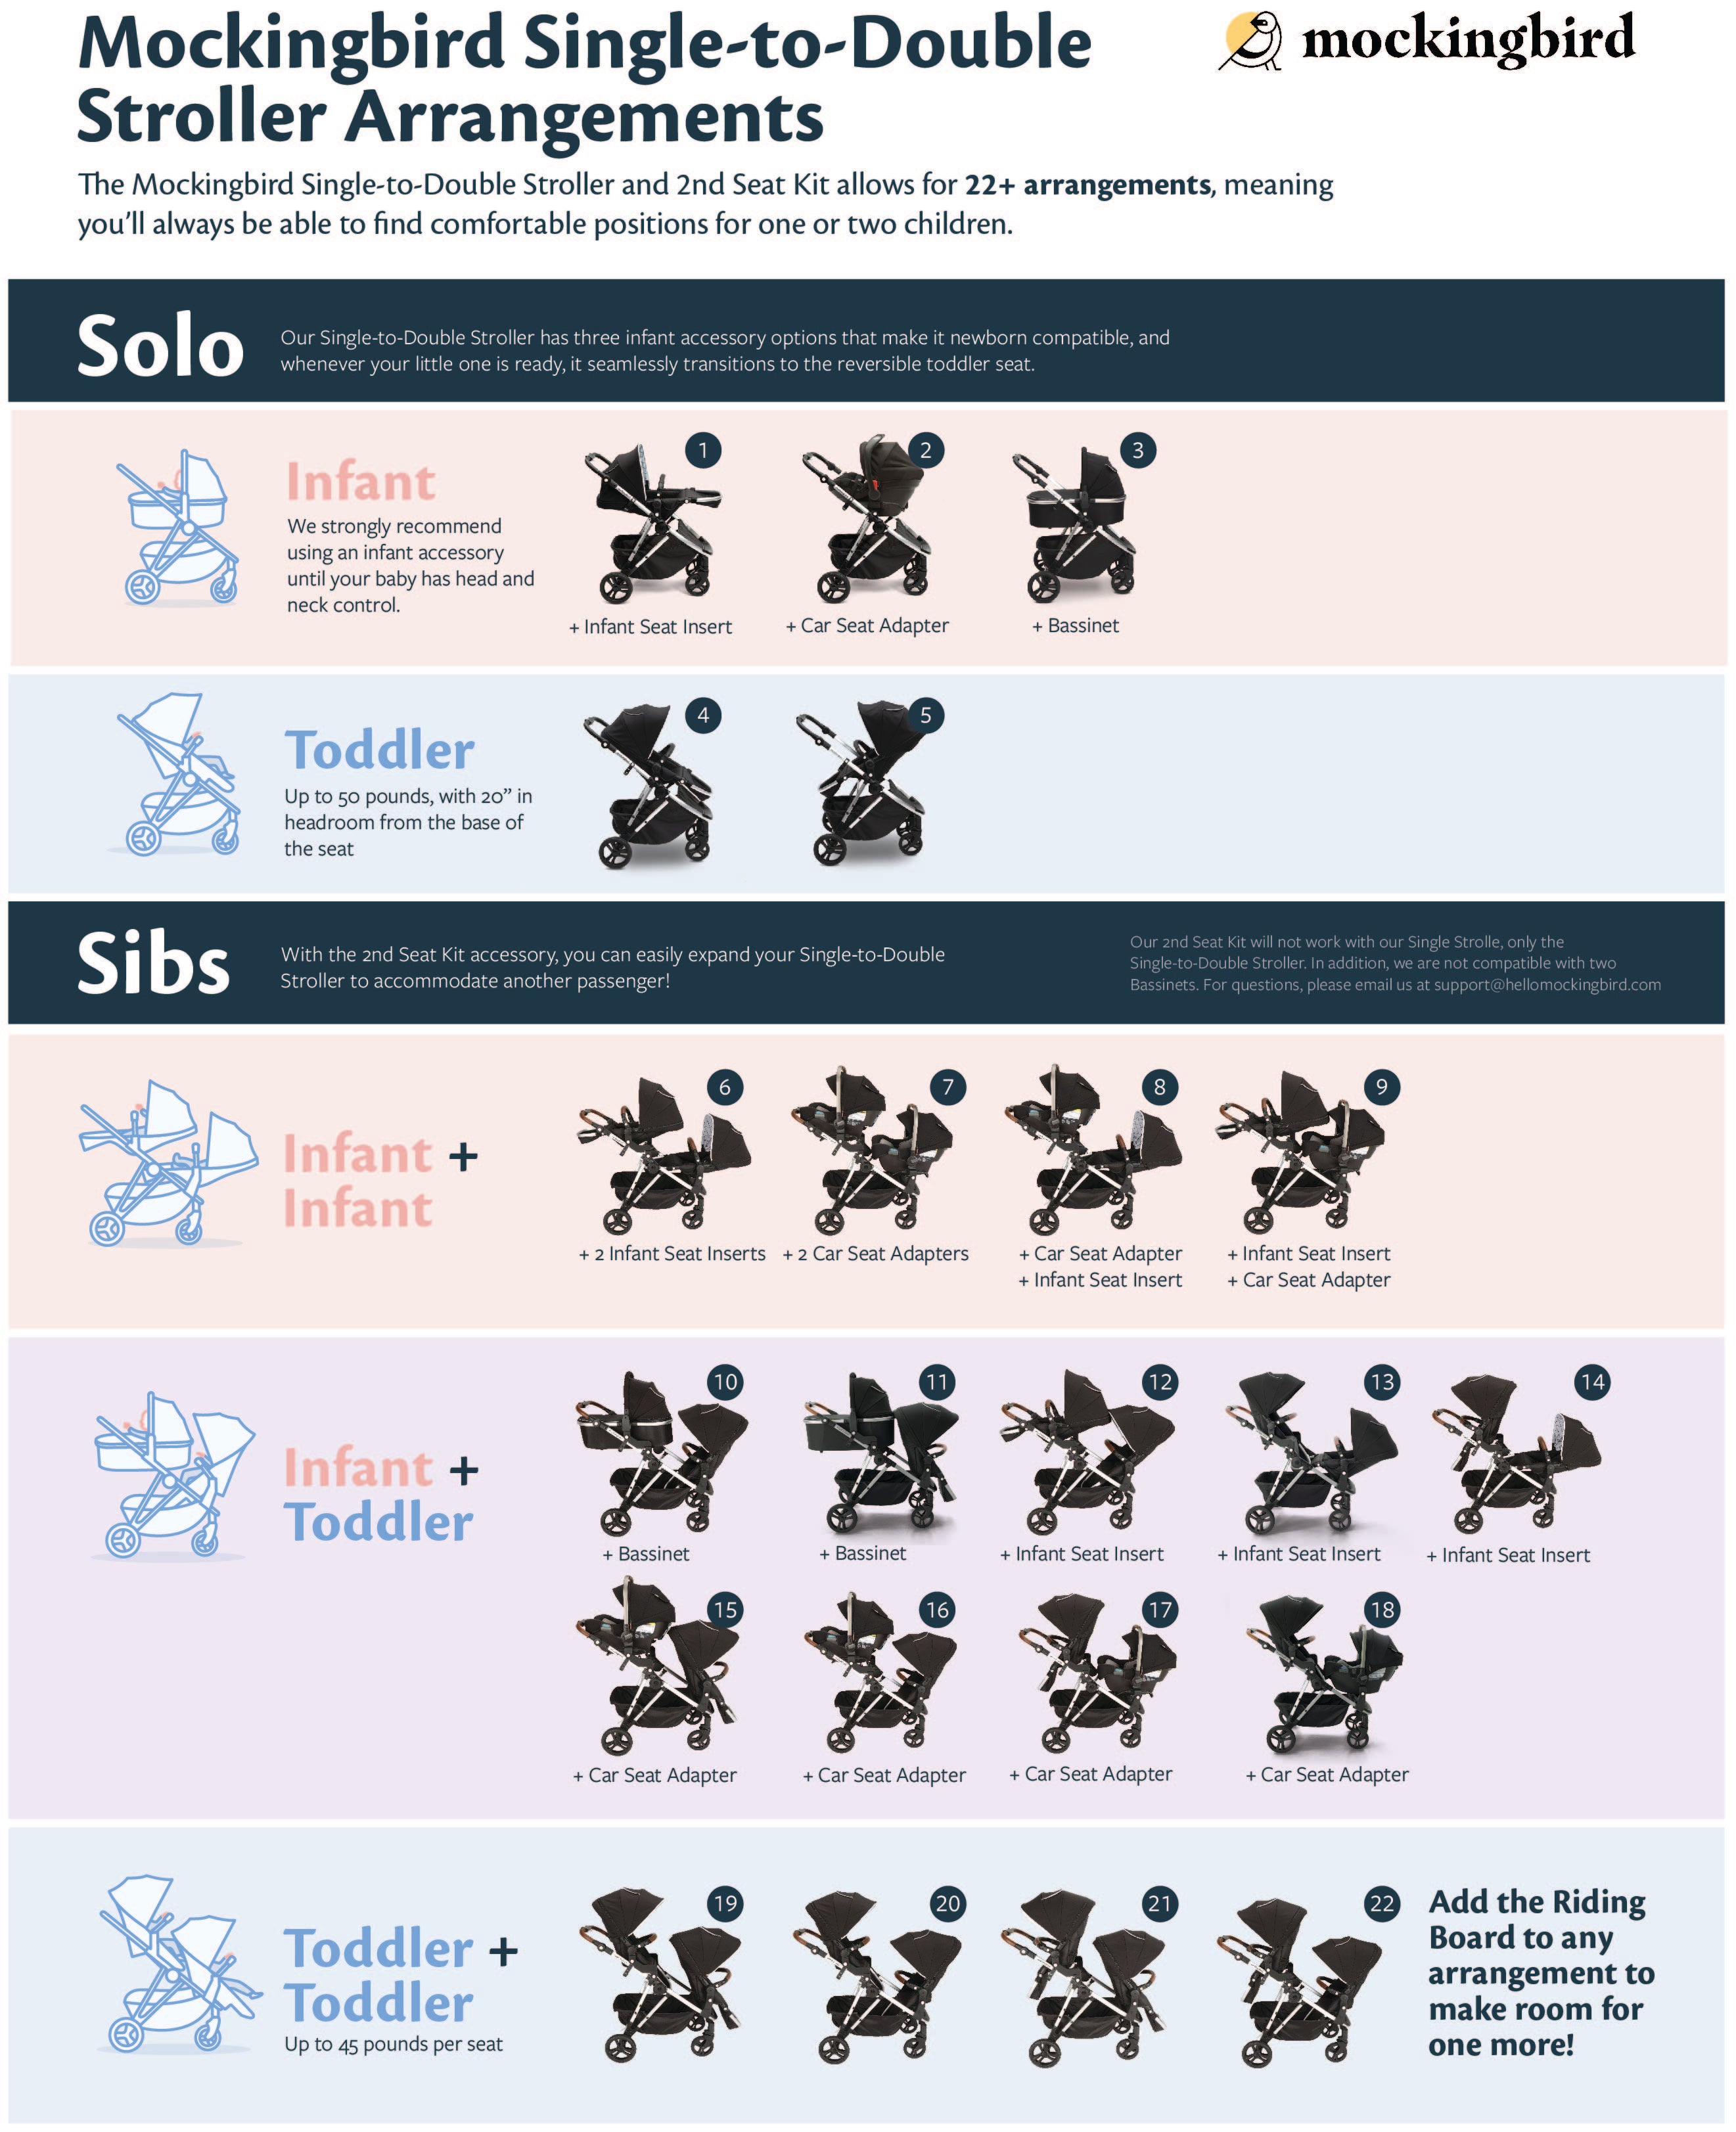 Illustration of a mockingbird stroller showing configurations for single and double seating options with various adapters and accessories for infants, toddlers, and siblings.